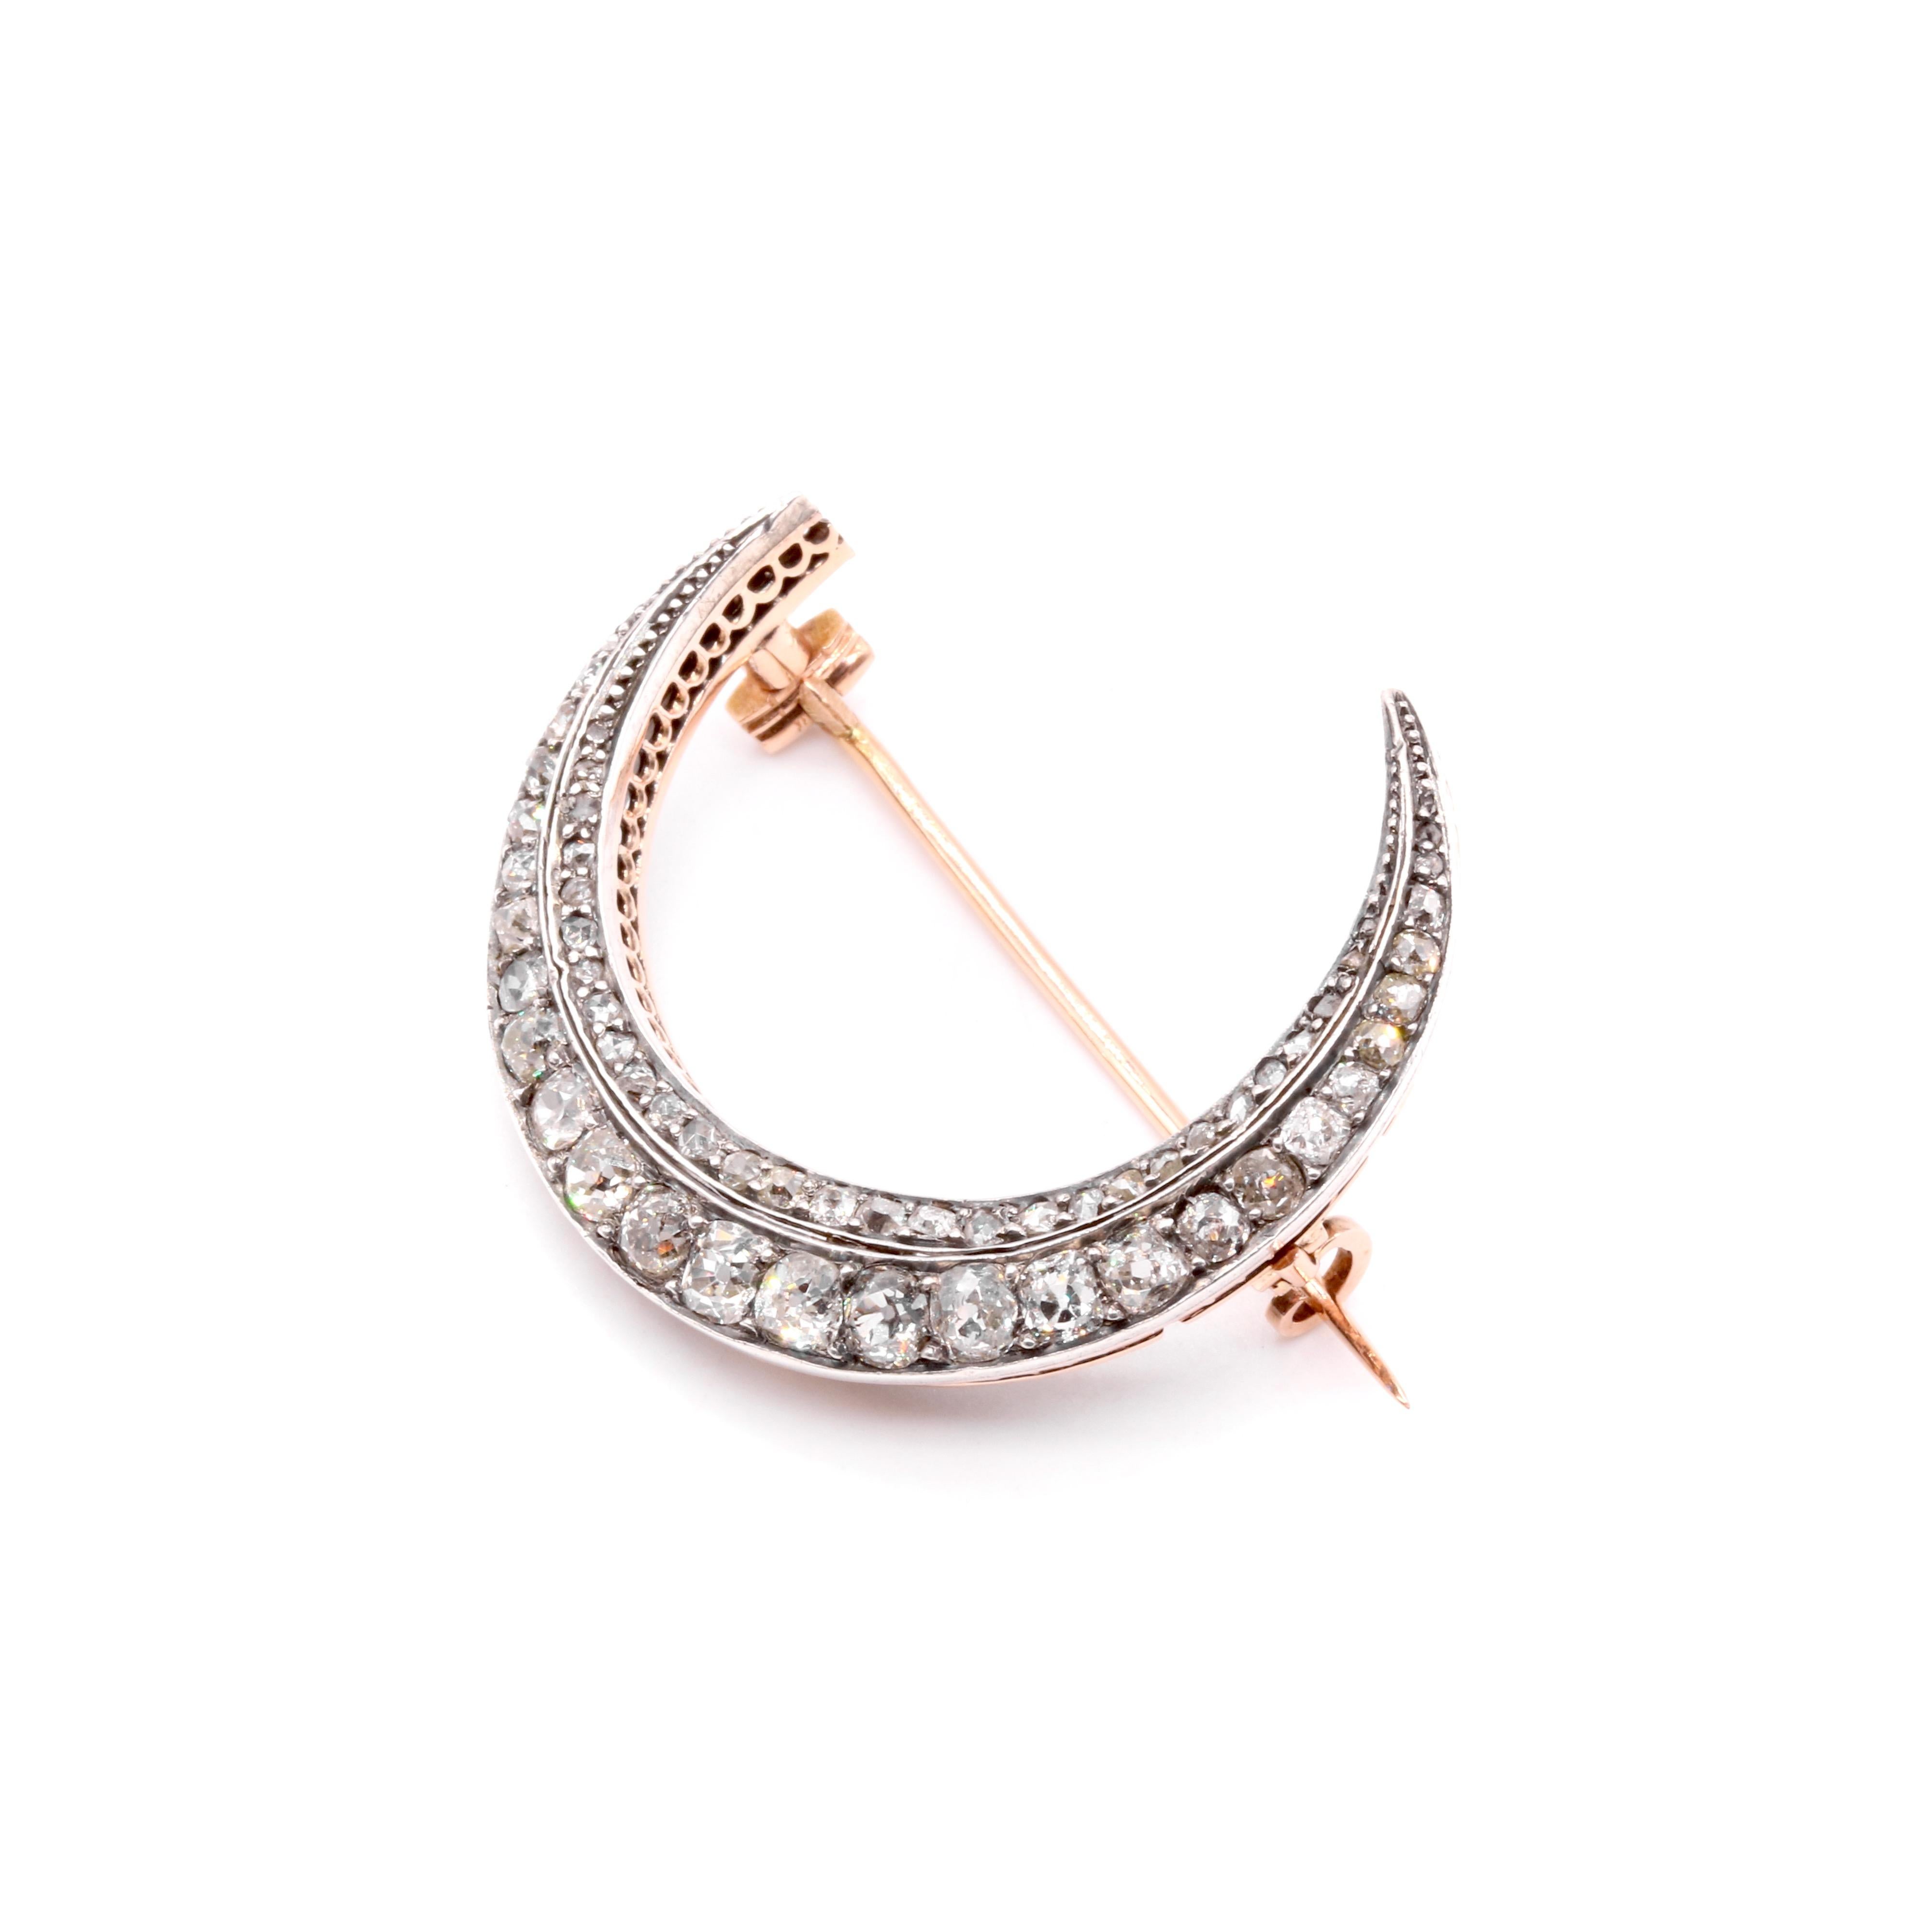 Antique Victorian 15K Gold & Silver 2.39ctw Diamond Crescent Brooch or Pendant For Sale 2